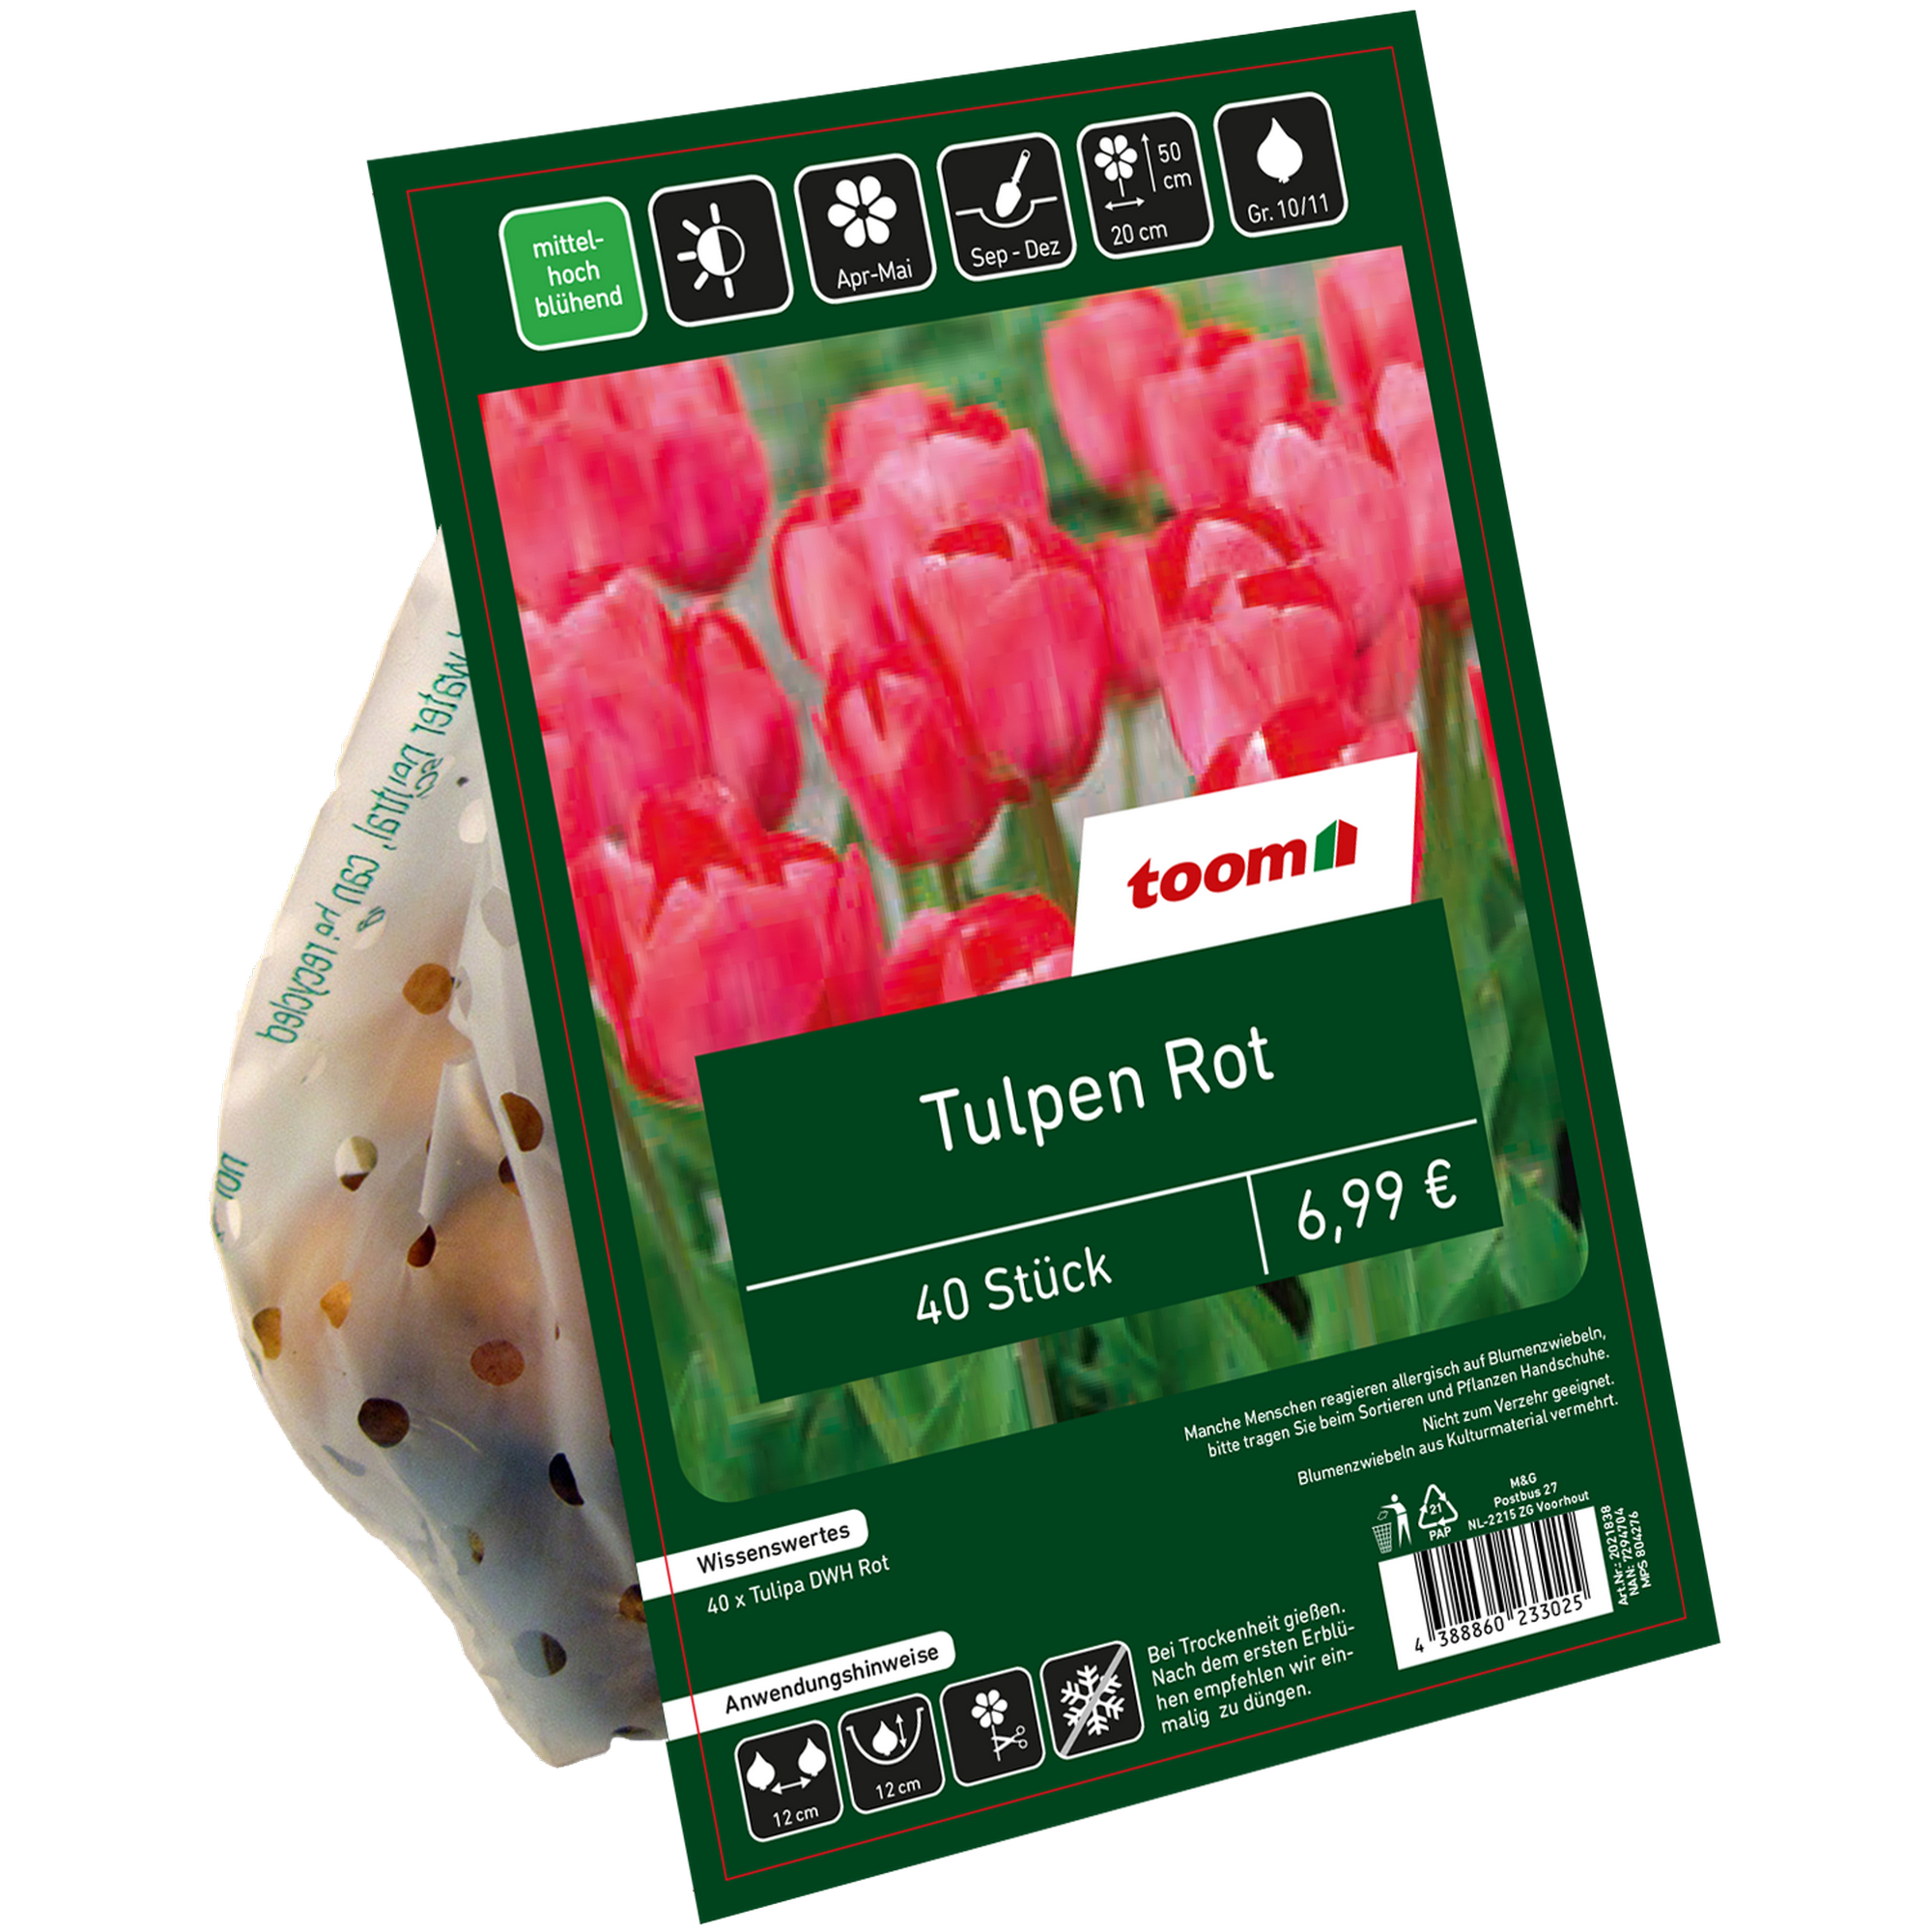 Tulpen rot 40 Zwiebeln + product picture